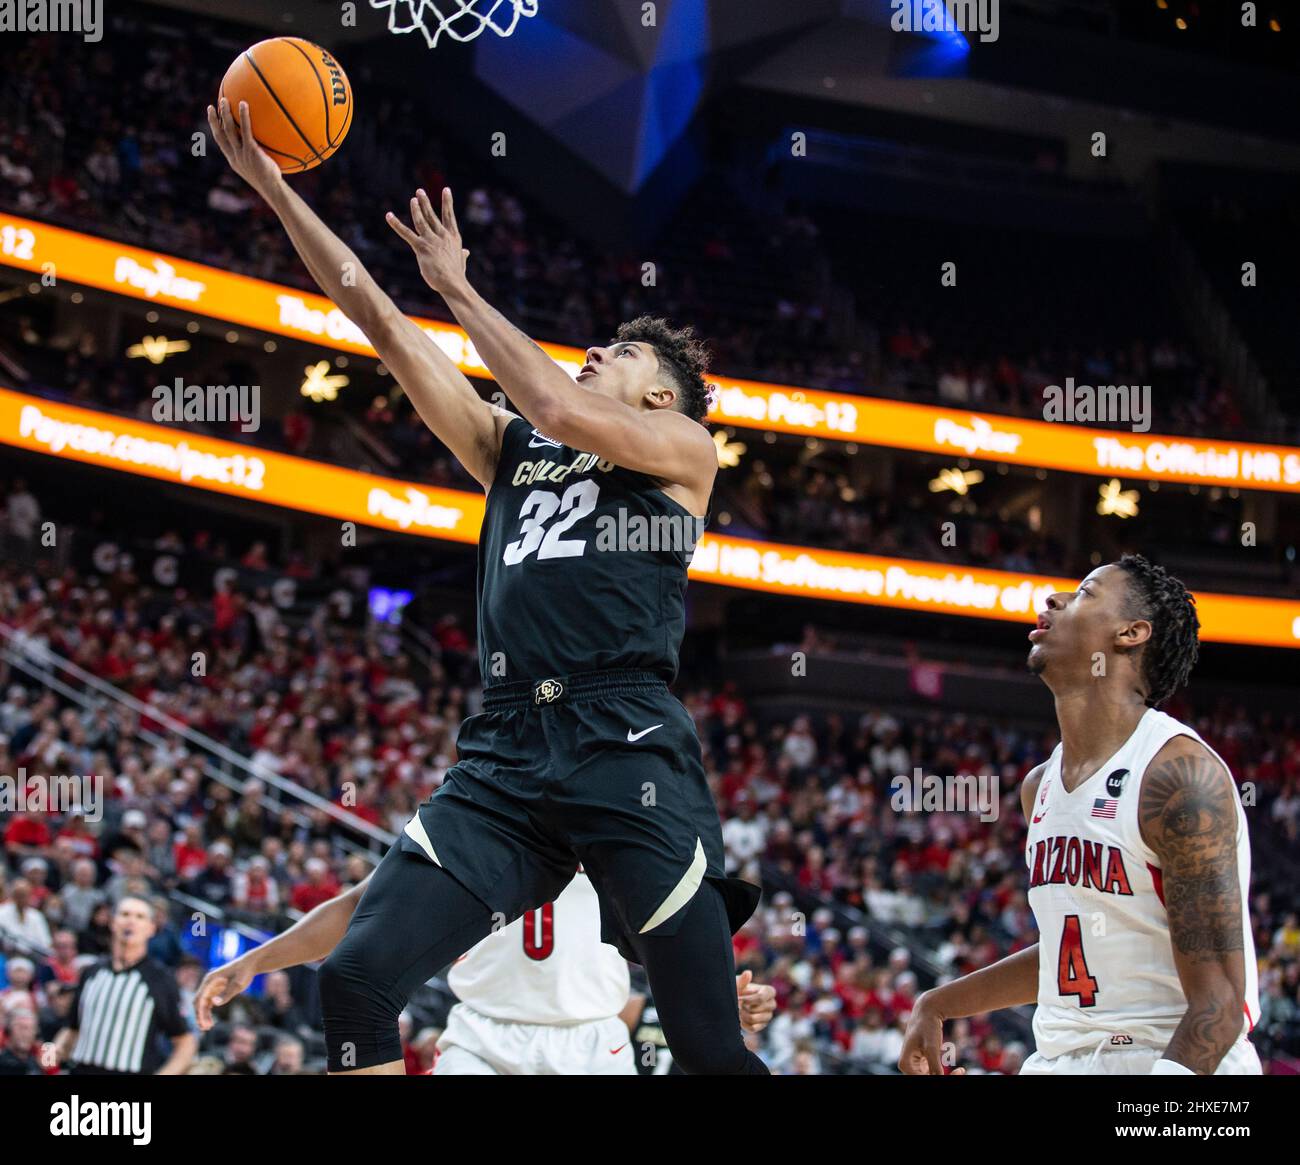 Las Vegas, NV, USA. 11th Mar, 2022. A. in the first half during the NCAA Pac 12 Men's Basketball Tournament Semifinal game between Arizona Wildcats and the Colorado Buffaloes at T Mobile Arena Las Vegas, NV. Thurman James/CSM/Alamy Live News Stock Photo